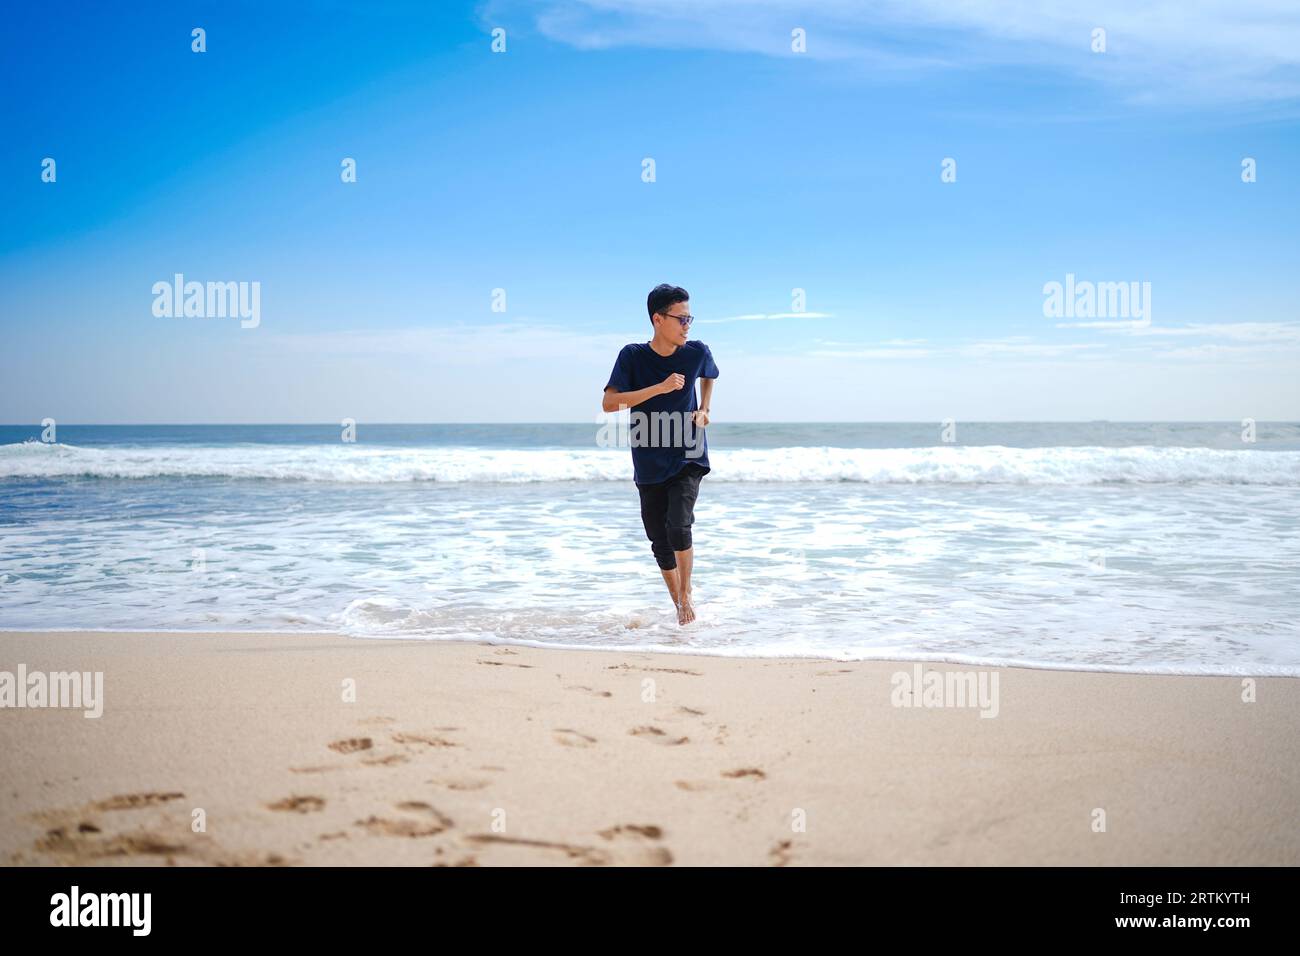 a man in a blue shirt, being chased by the waves. This beach looks beautiful, clean and white sand. Stock Photo